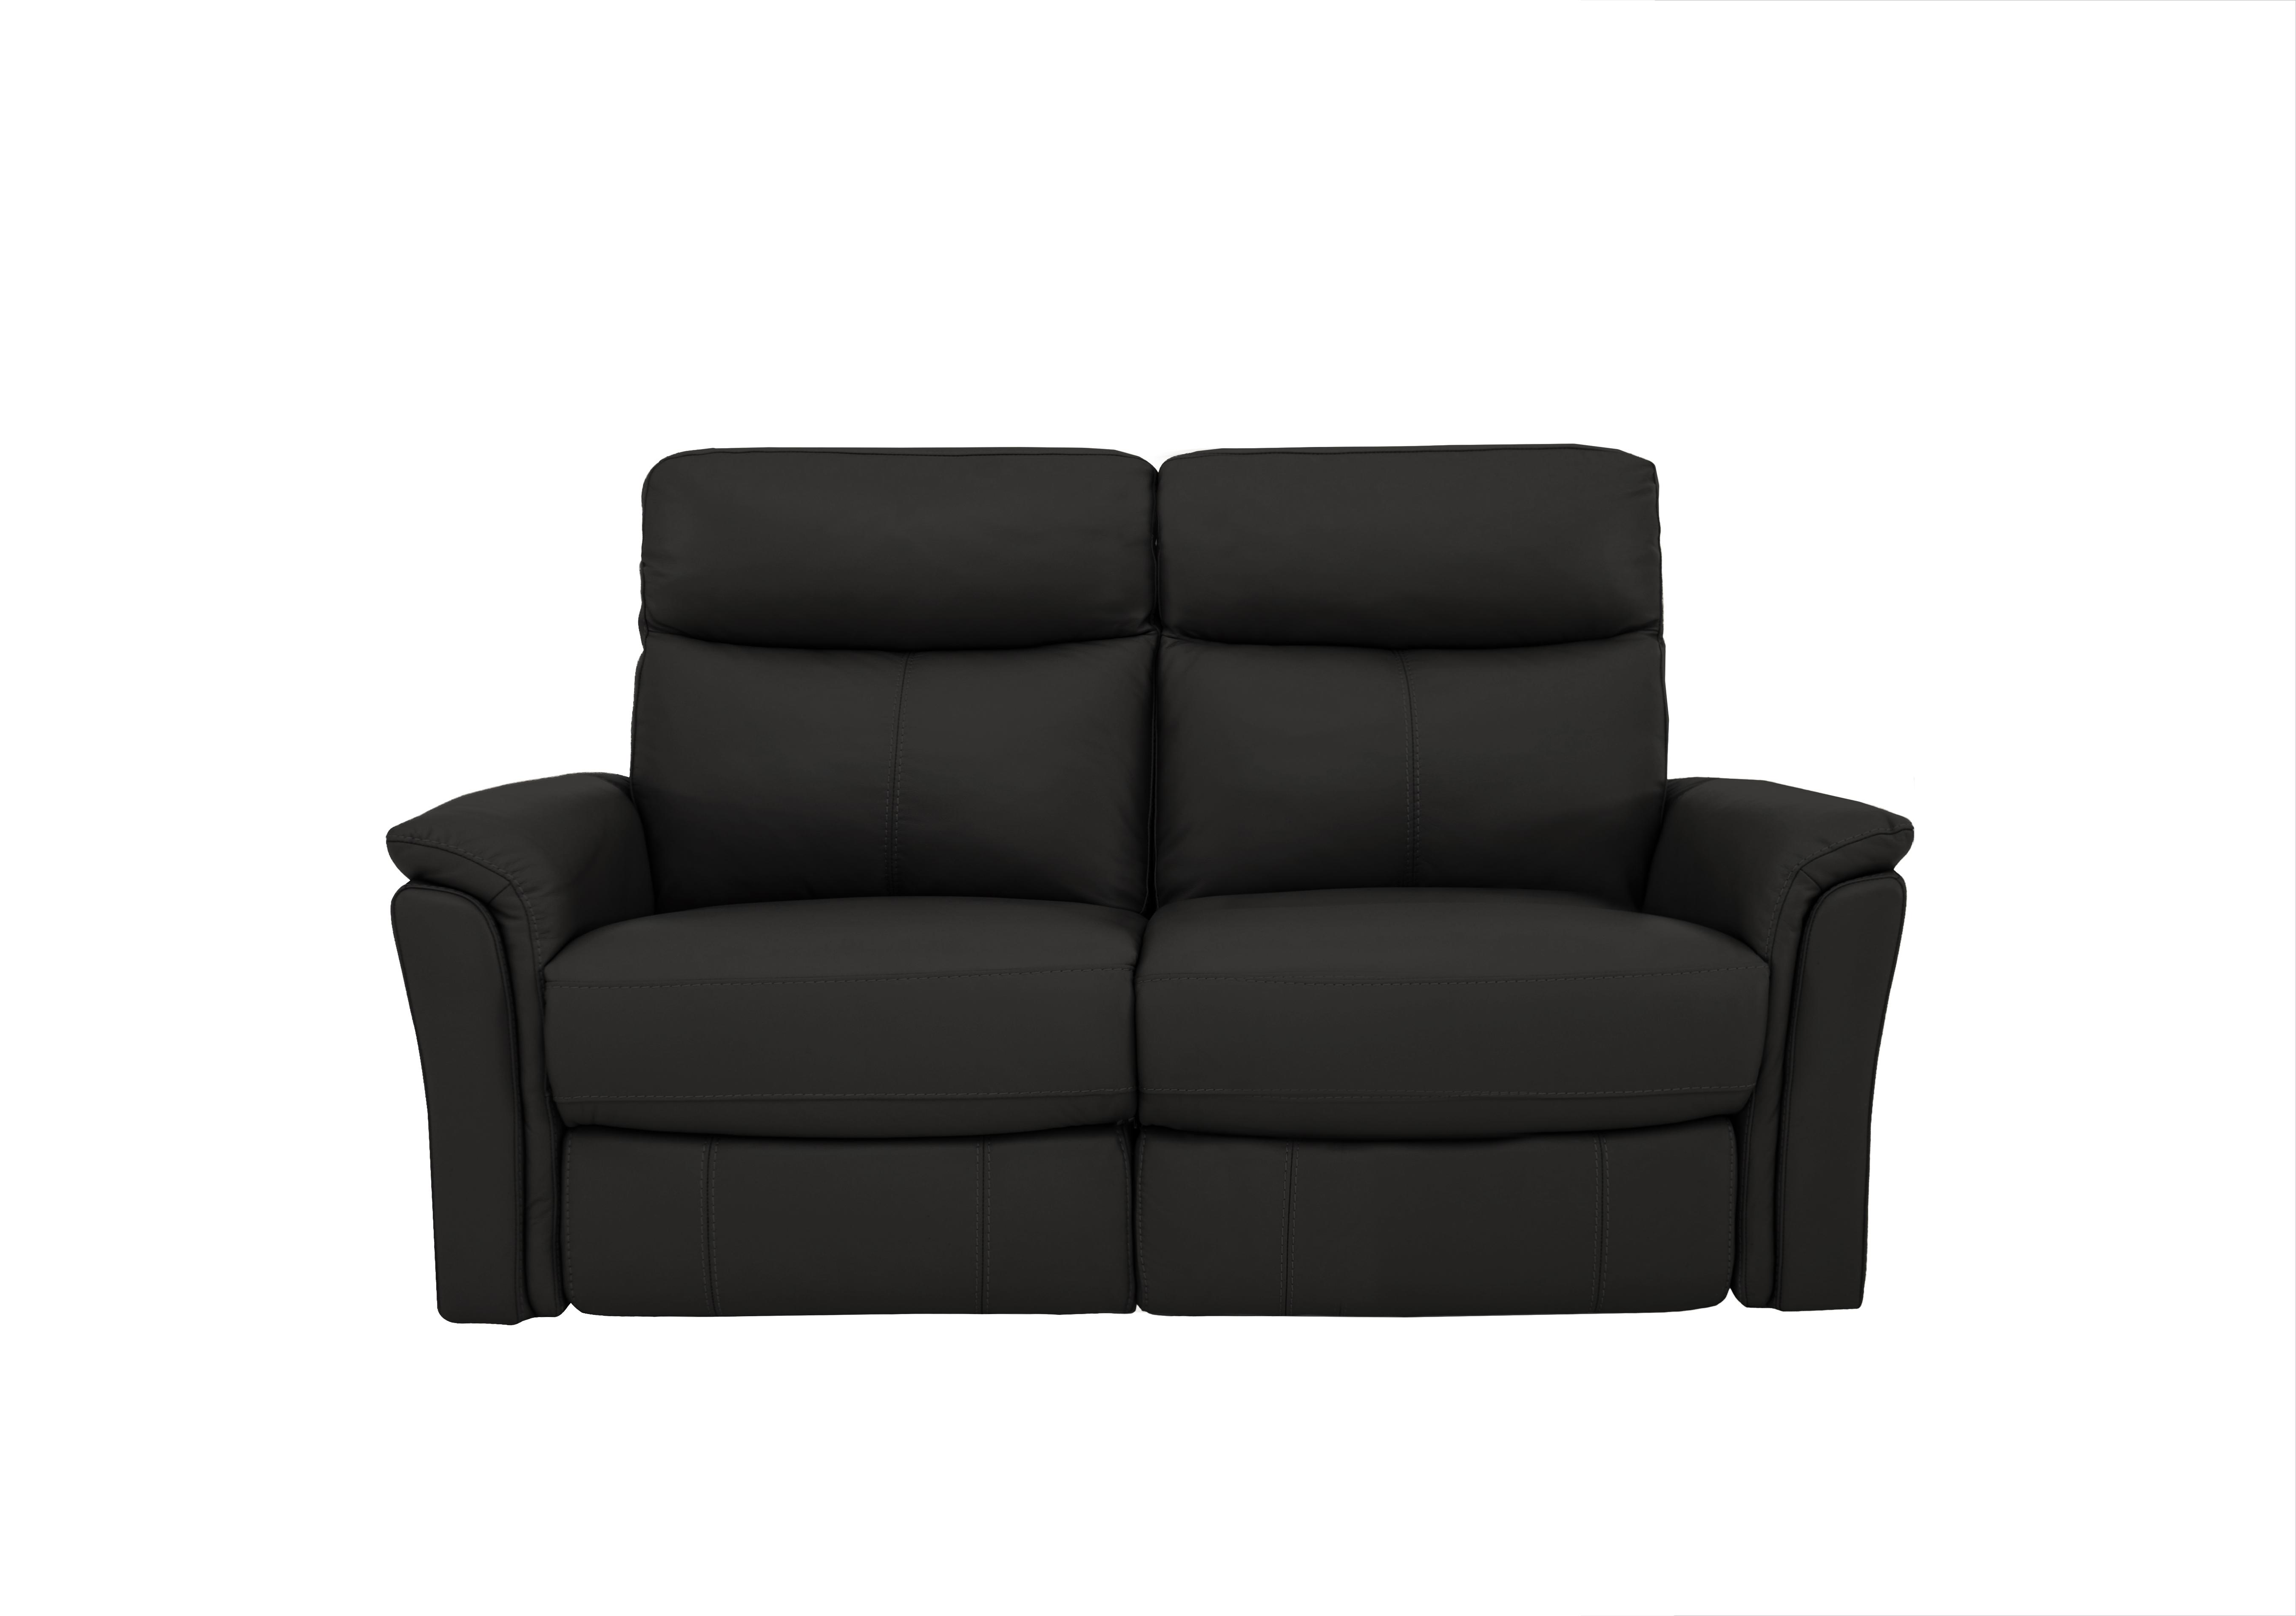 Compact Collection Piccolo 2 Seater Sofa in Bv-3500 Classic Black on Furniture Village